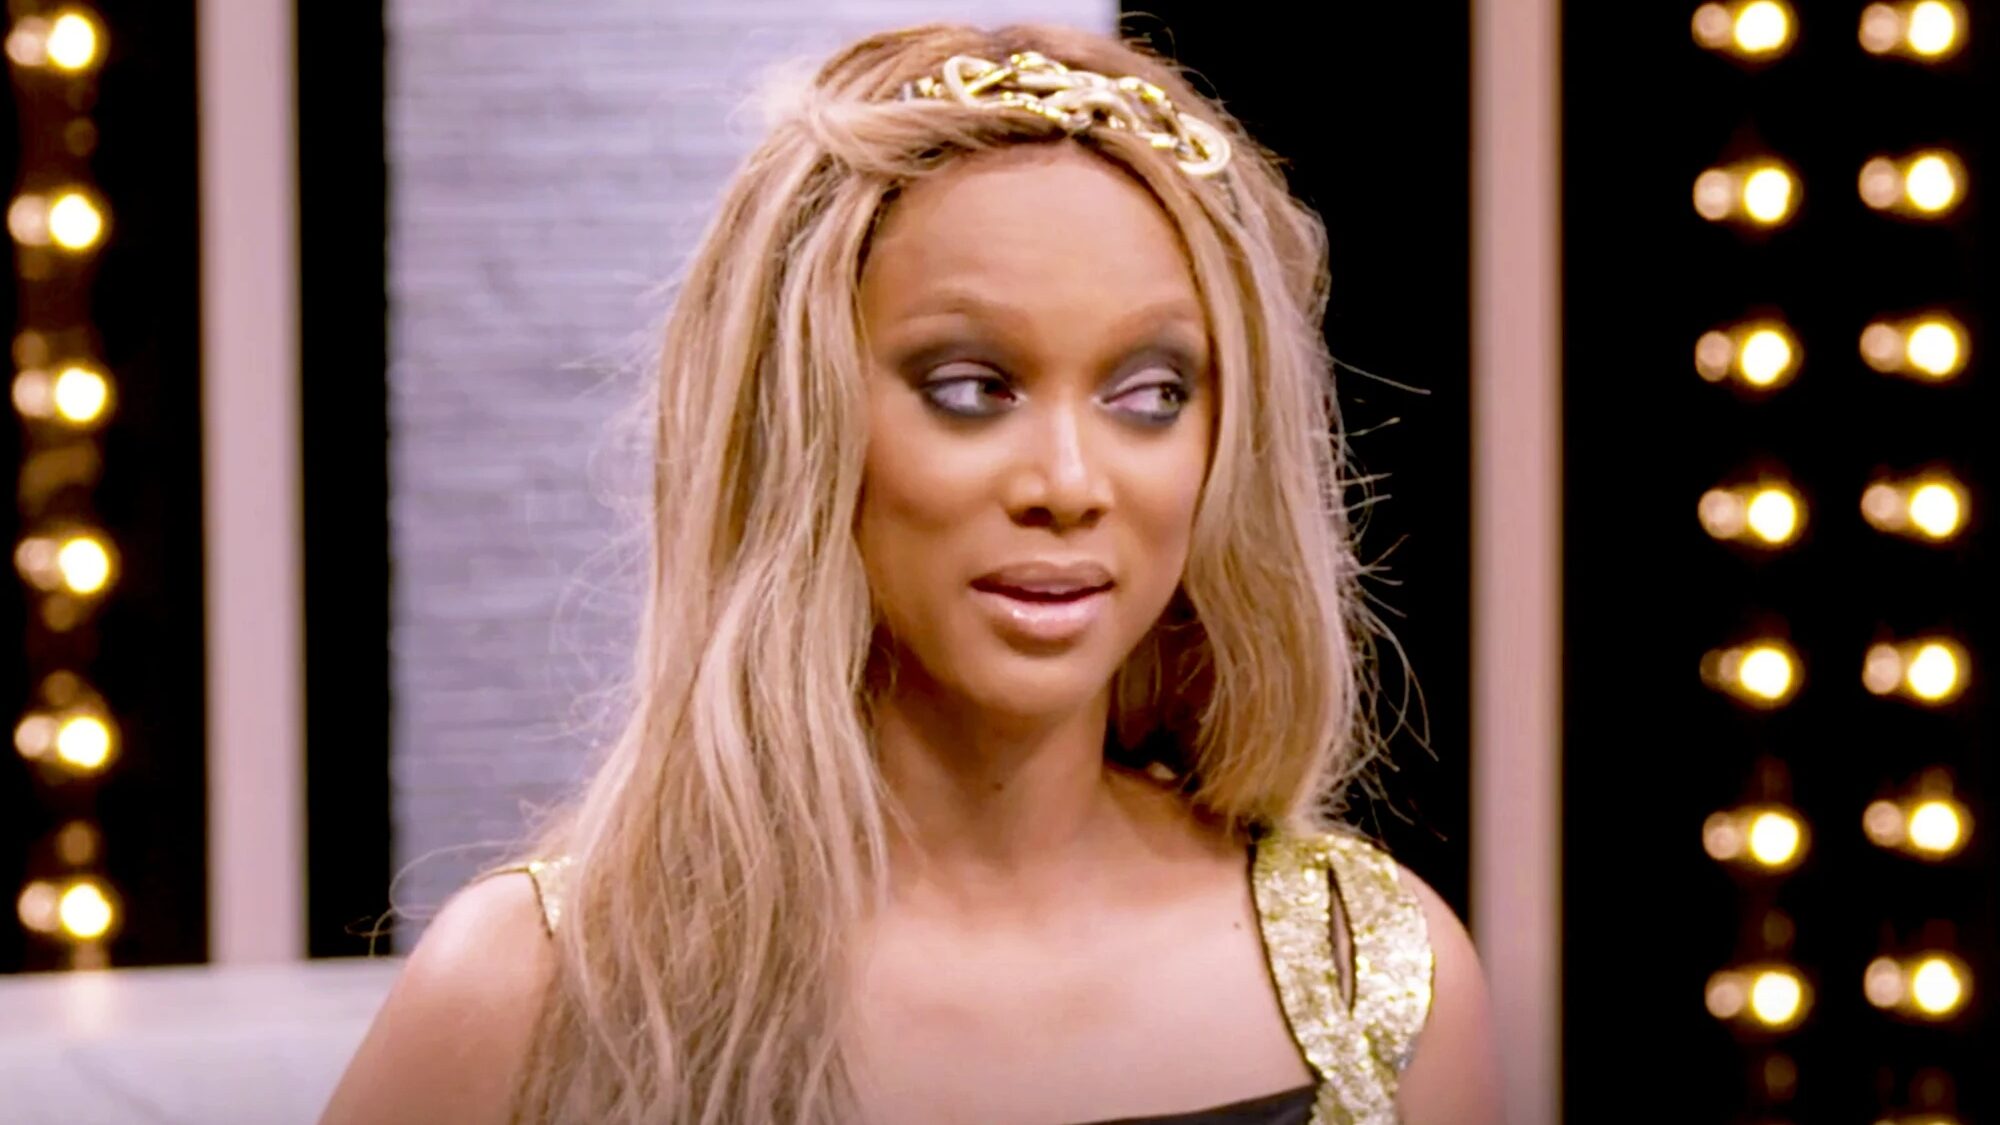 Tyra Banks returning as host of 'America's Next Top Model' - Greater  Victoria News